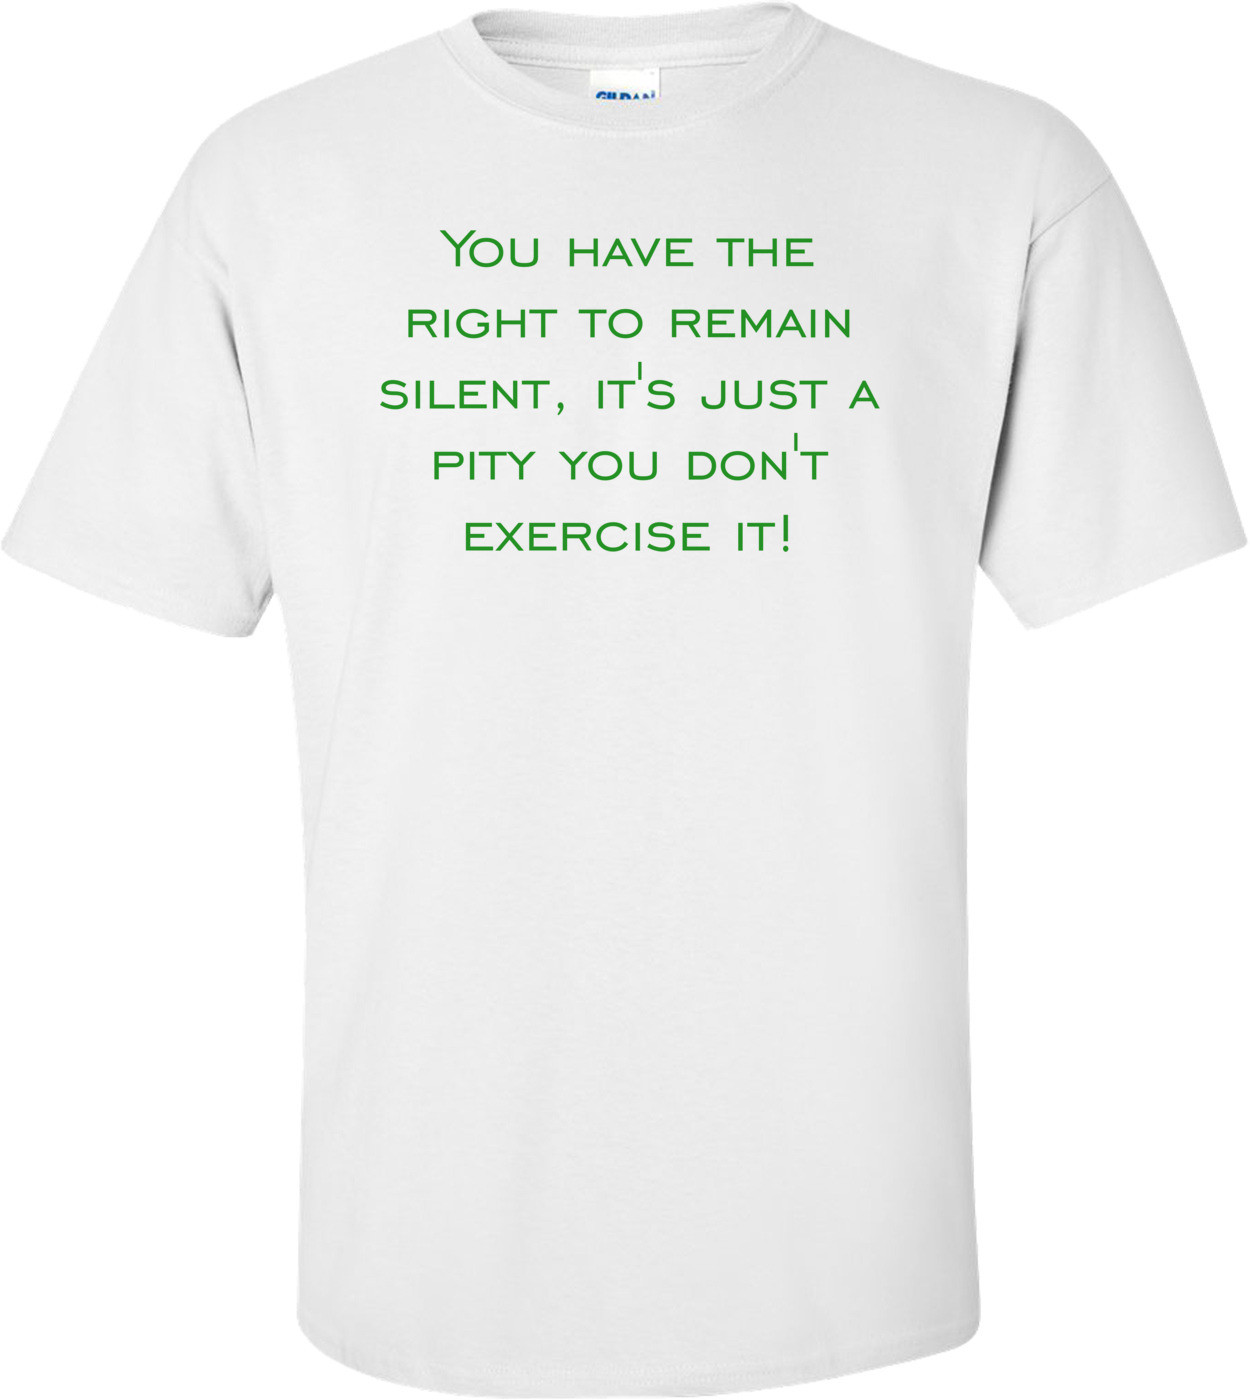 You have the right to remain silent, it's just a pity you don't exercise it! Shirt